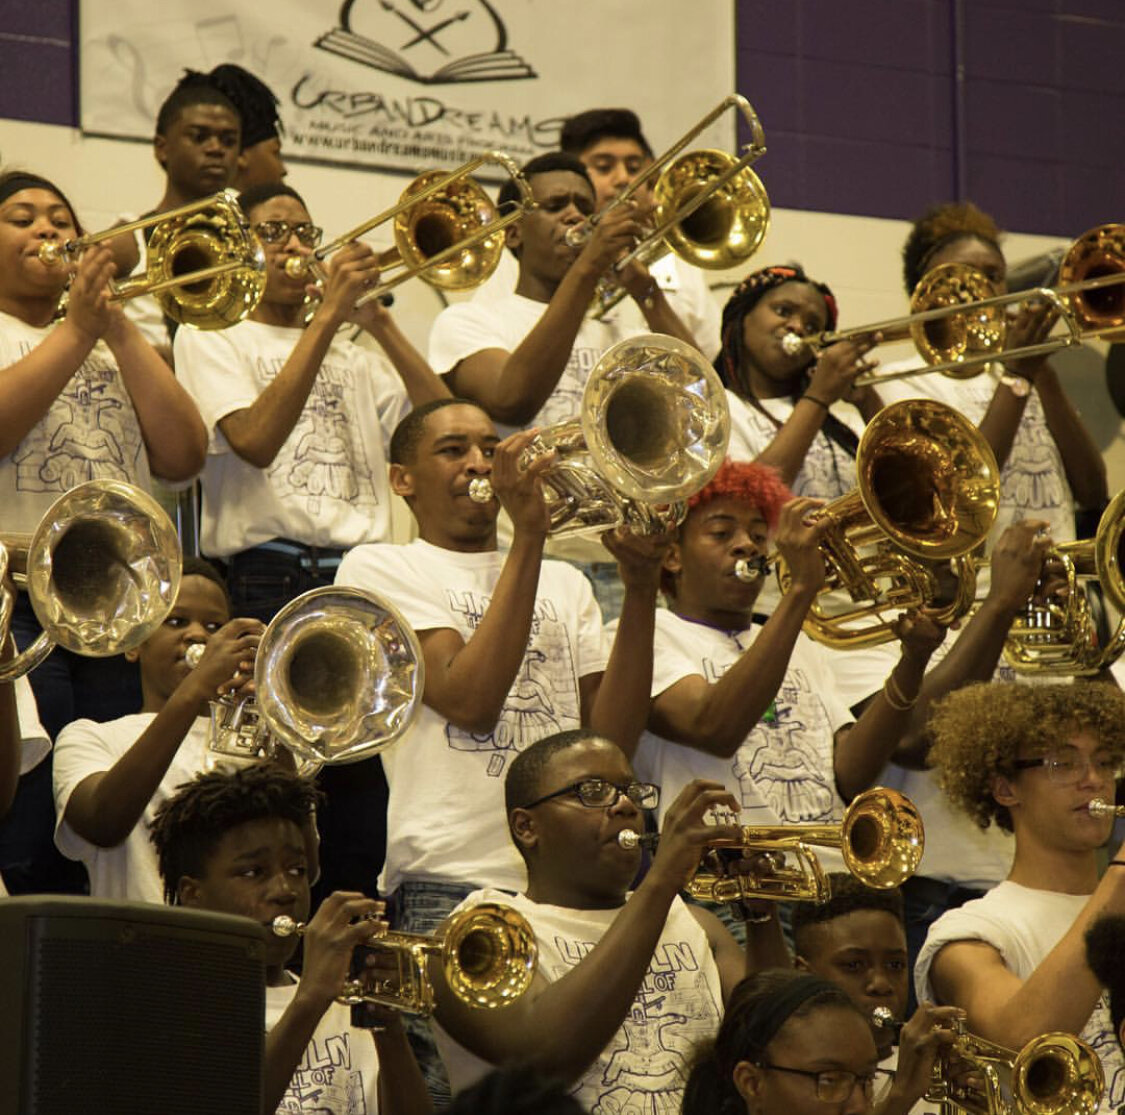 Student musicians from Lincoln High School. Photo courtesy of Urban Dreams.